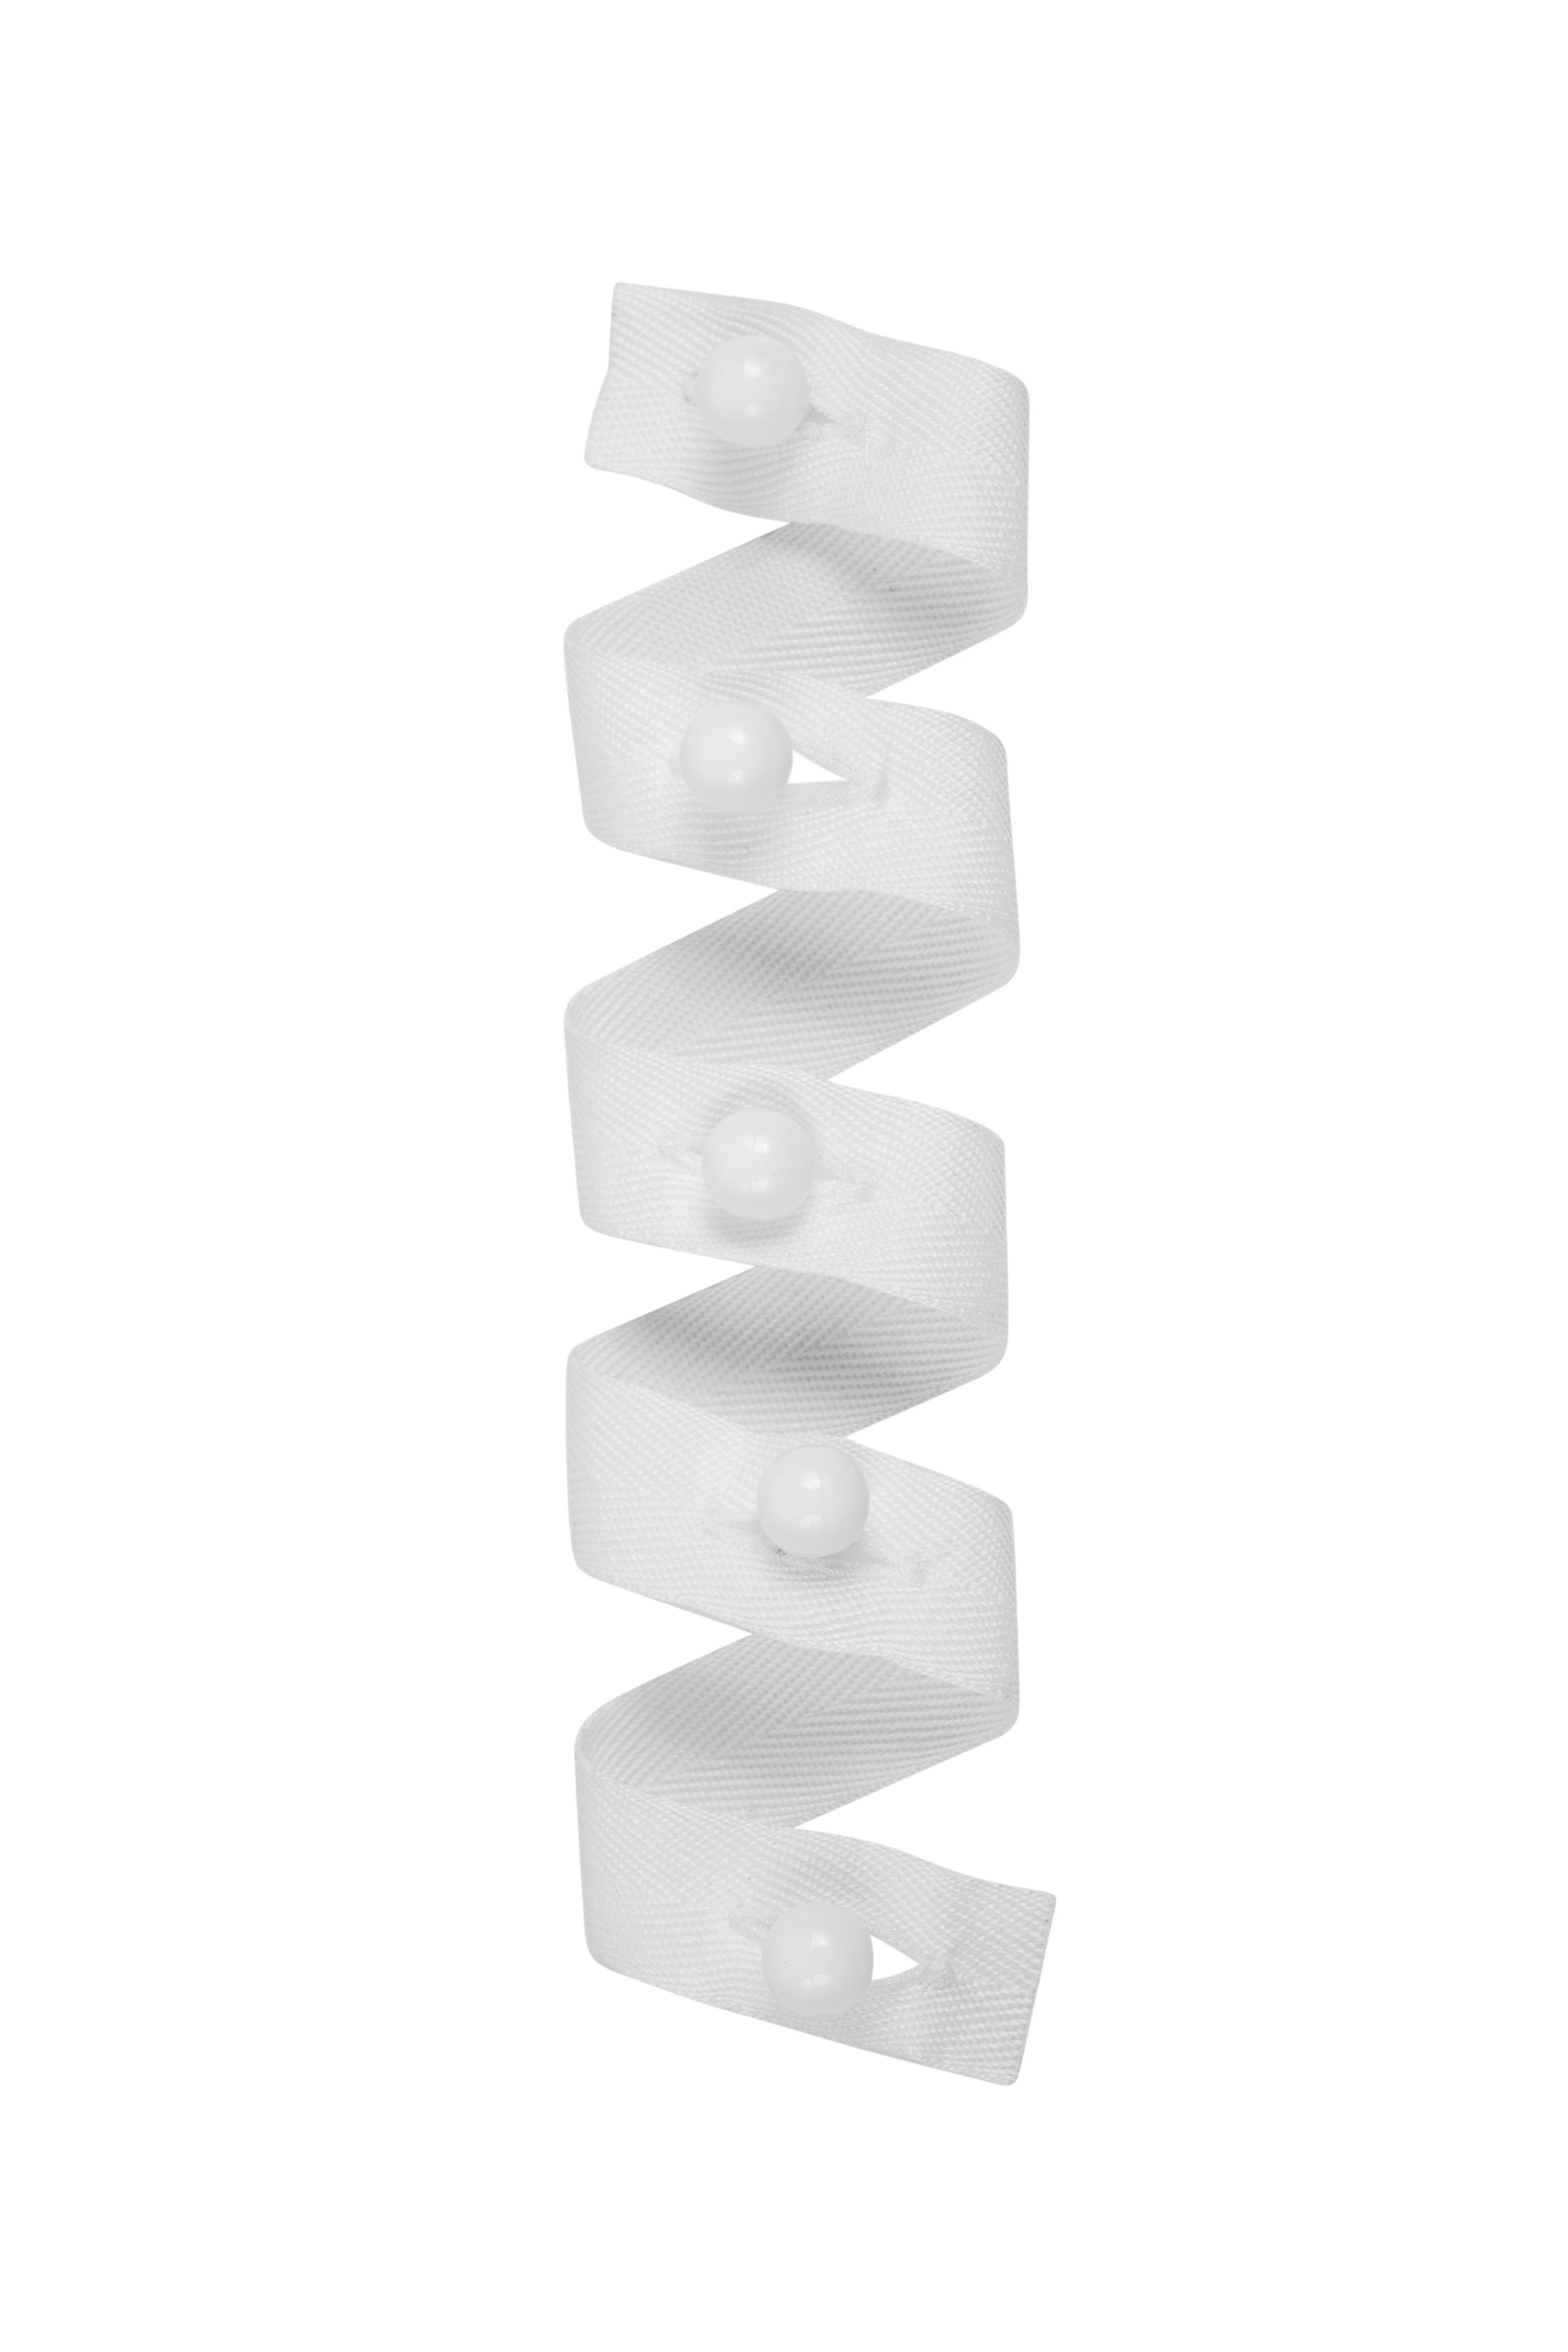 ChefsCraft White Stud Buttons on Tape 10pk